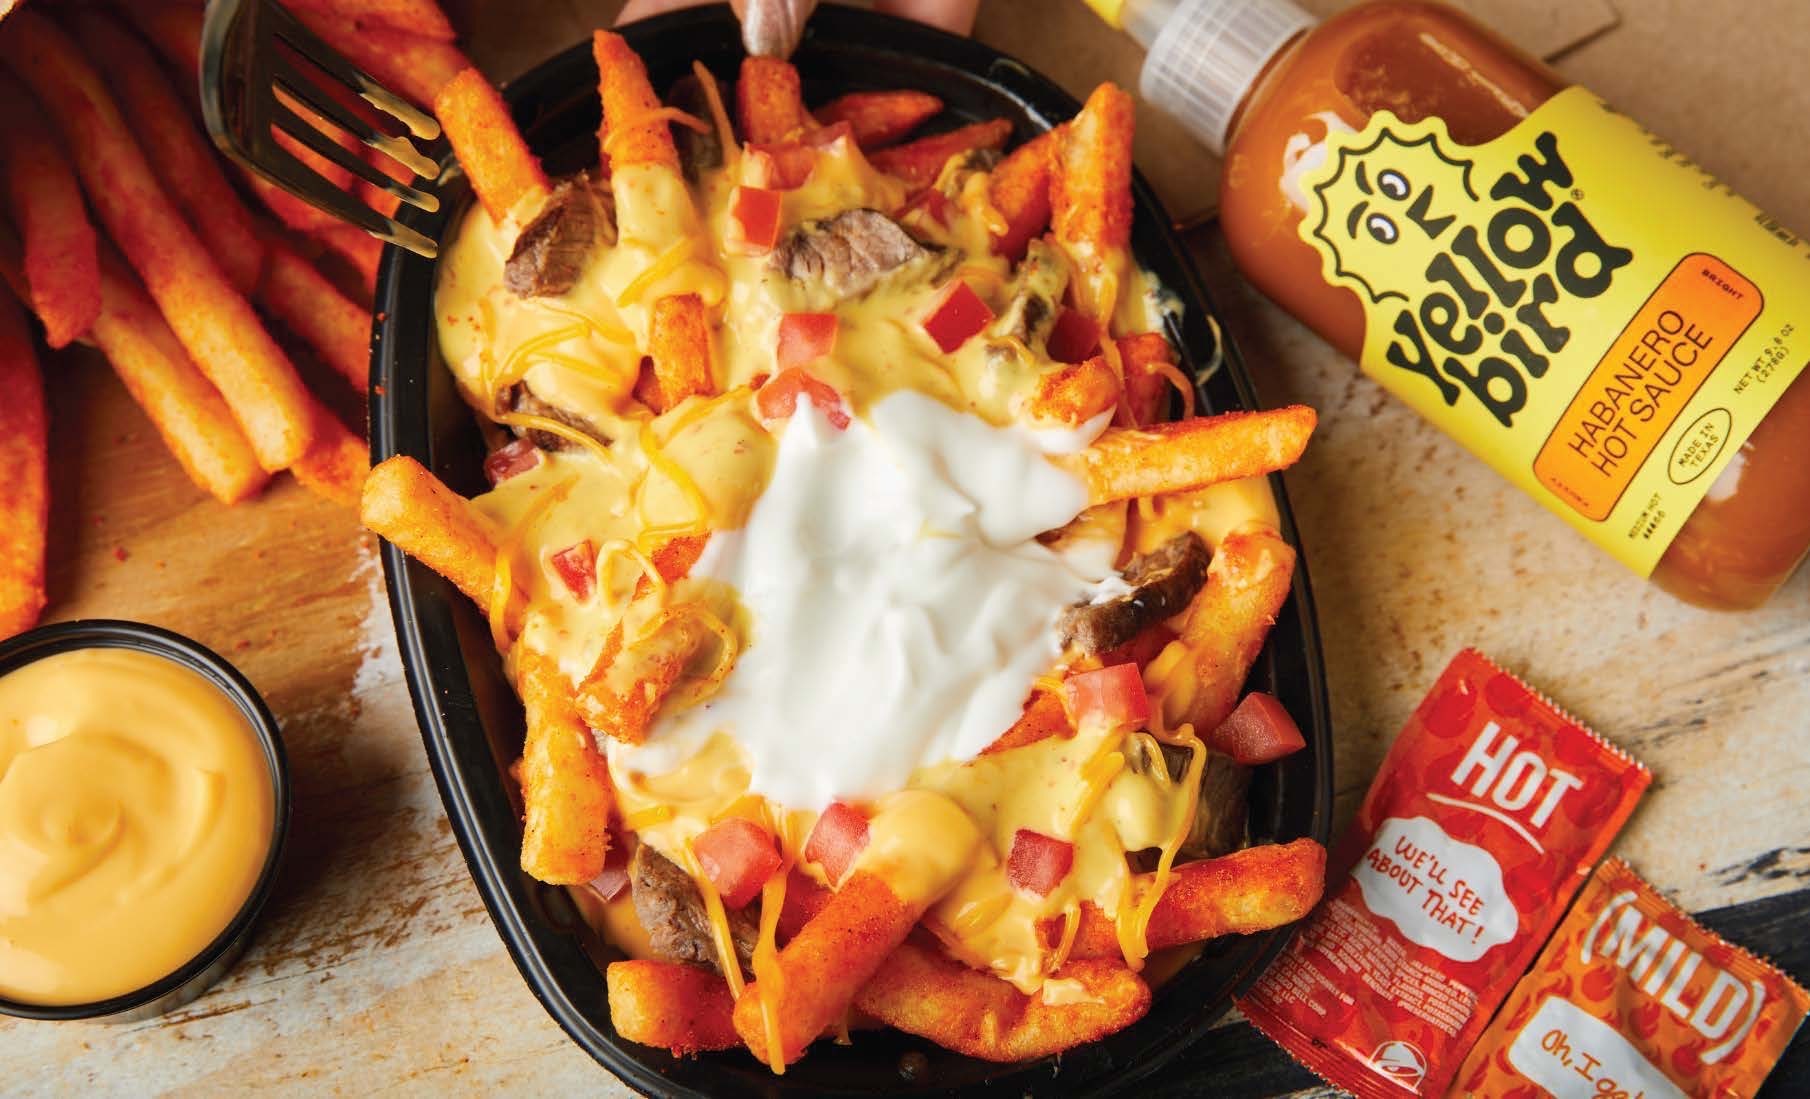 Taco Bell's Nacho Fries are coming back again